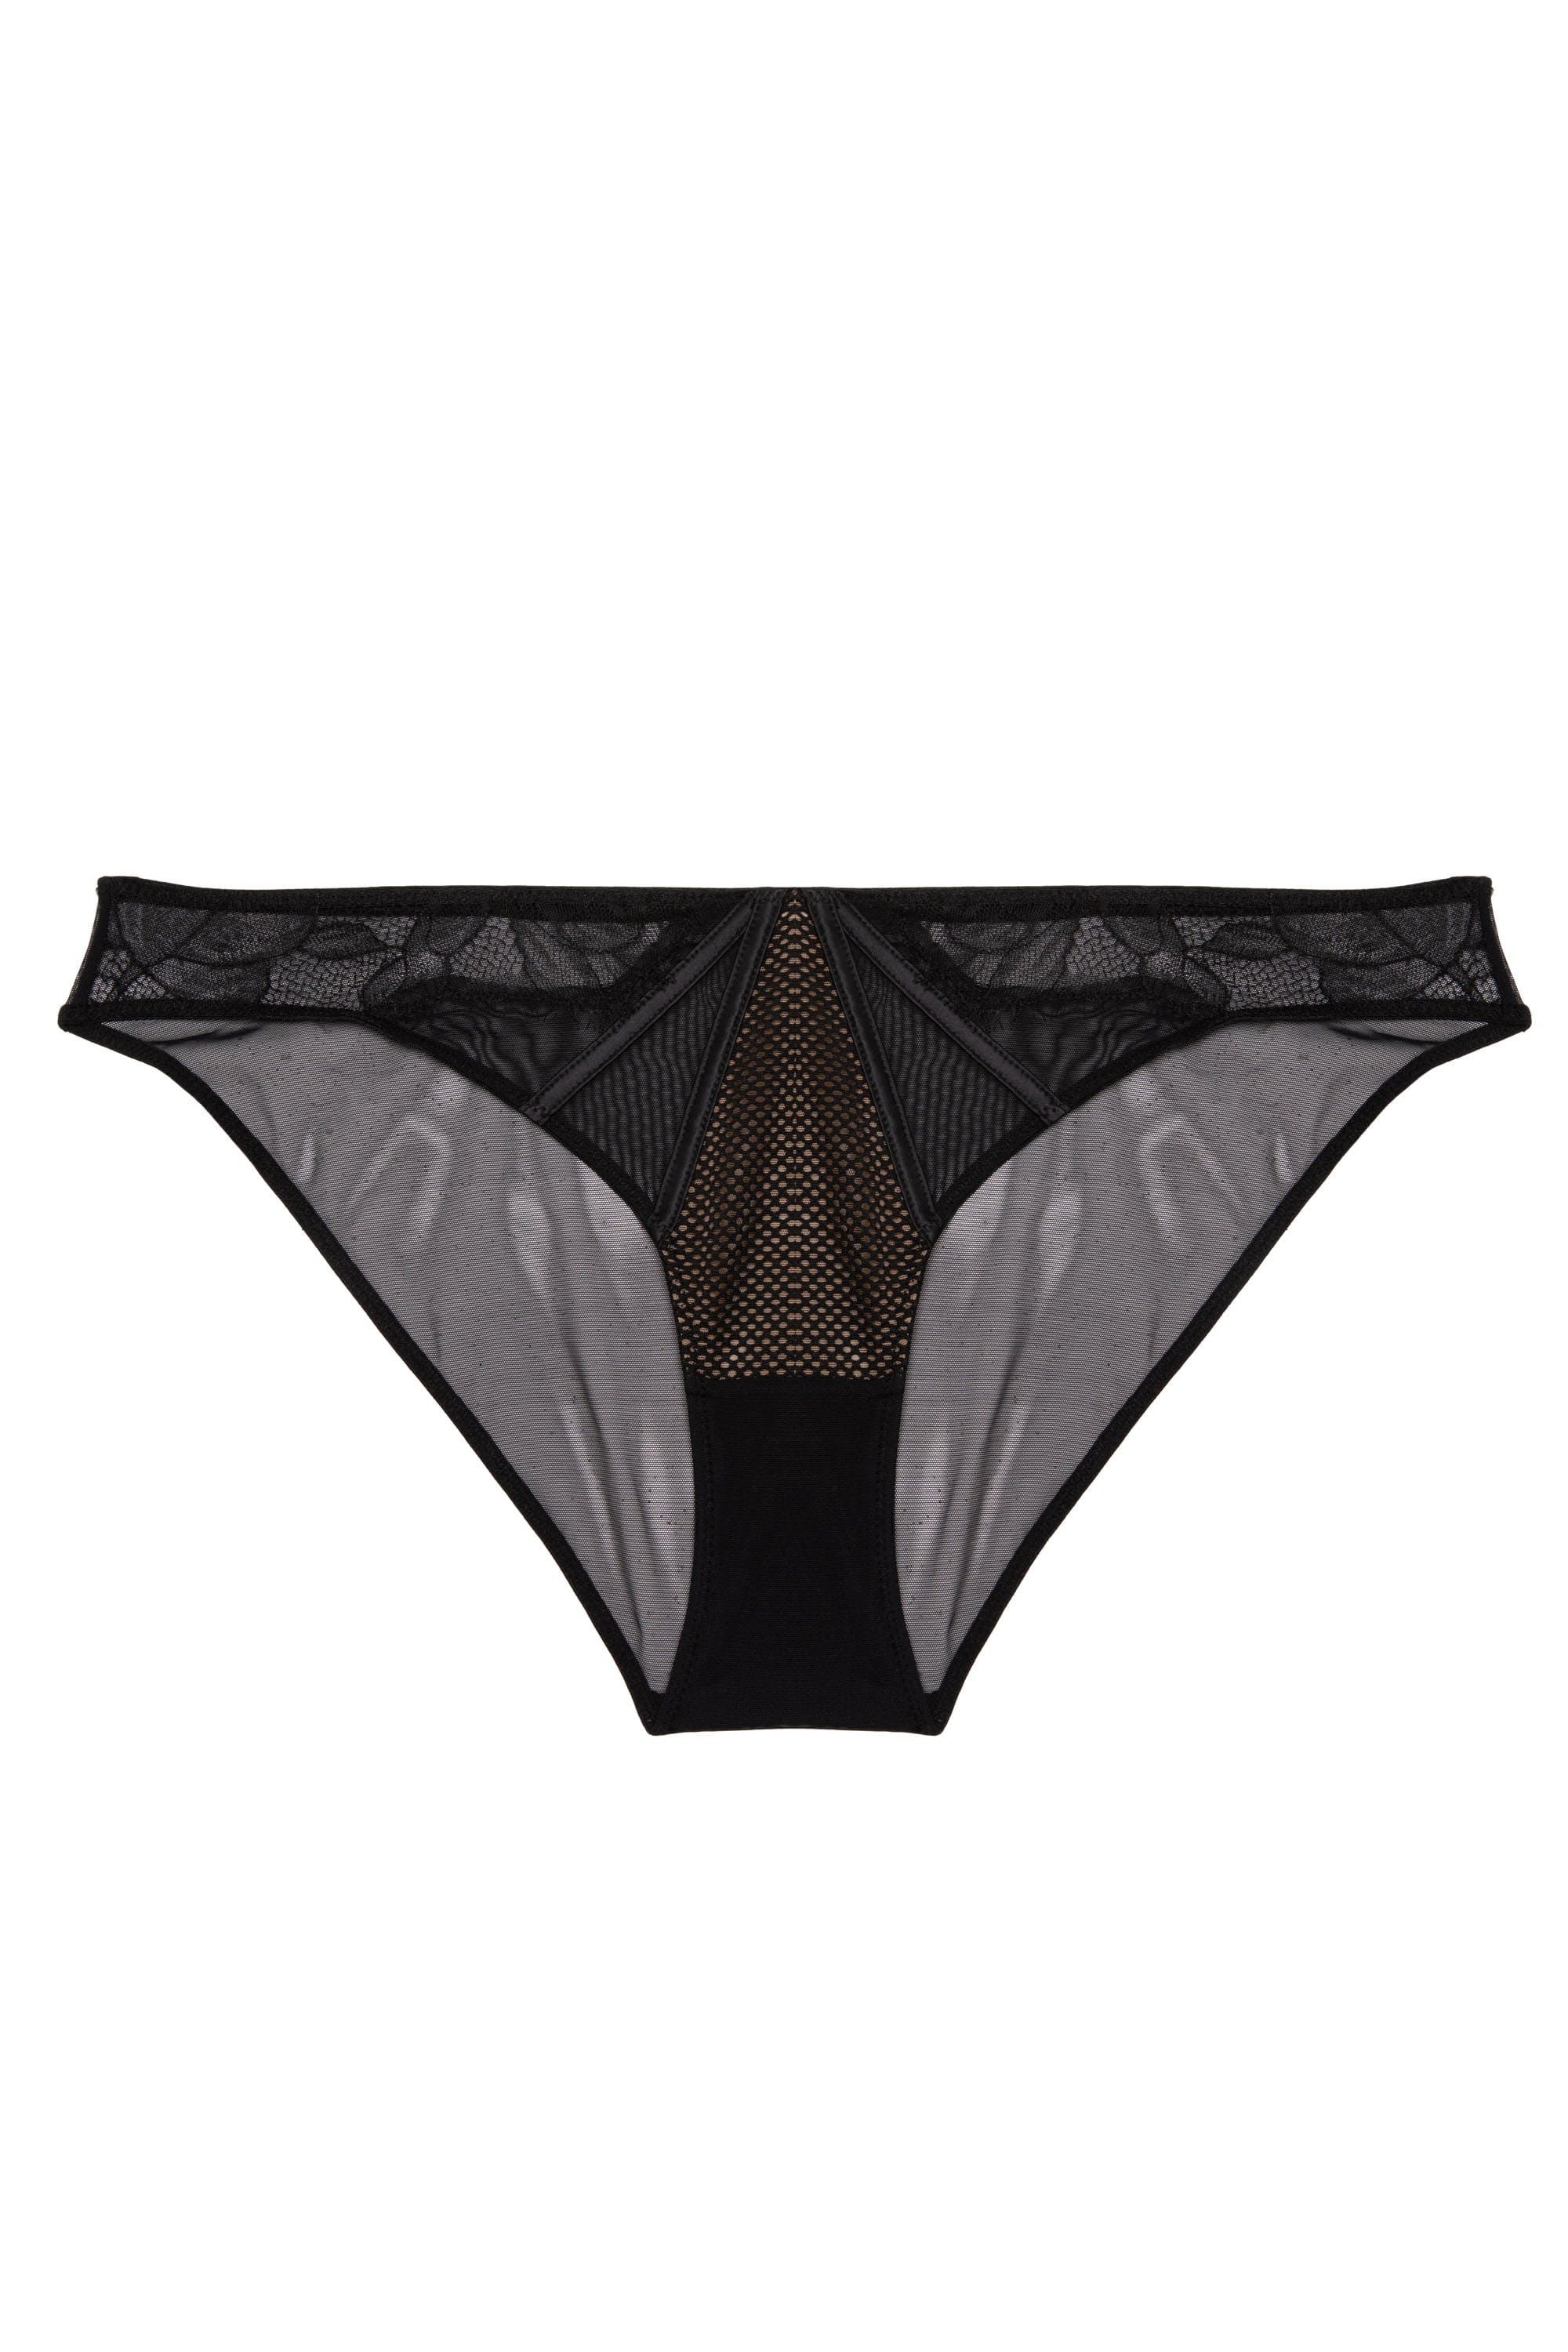 Fairfield Black Fishnet And Lace Hipster Brief